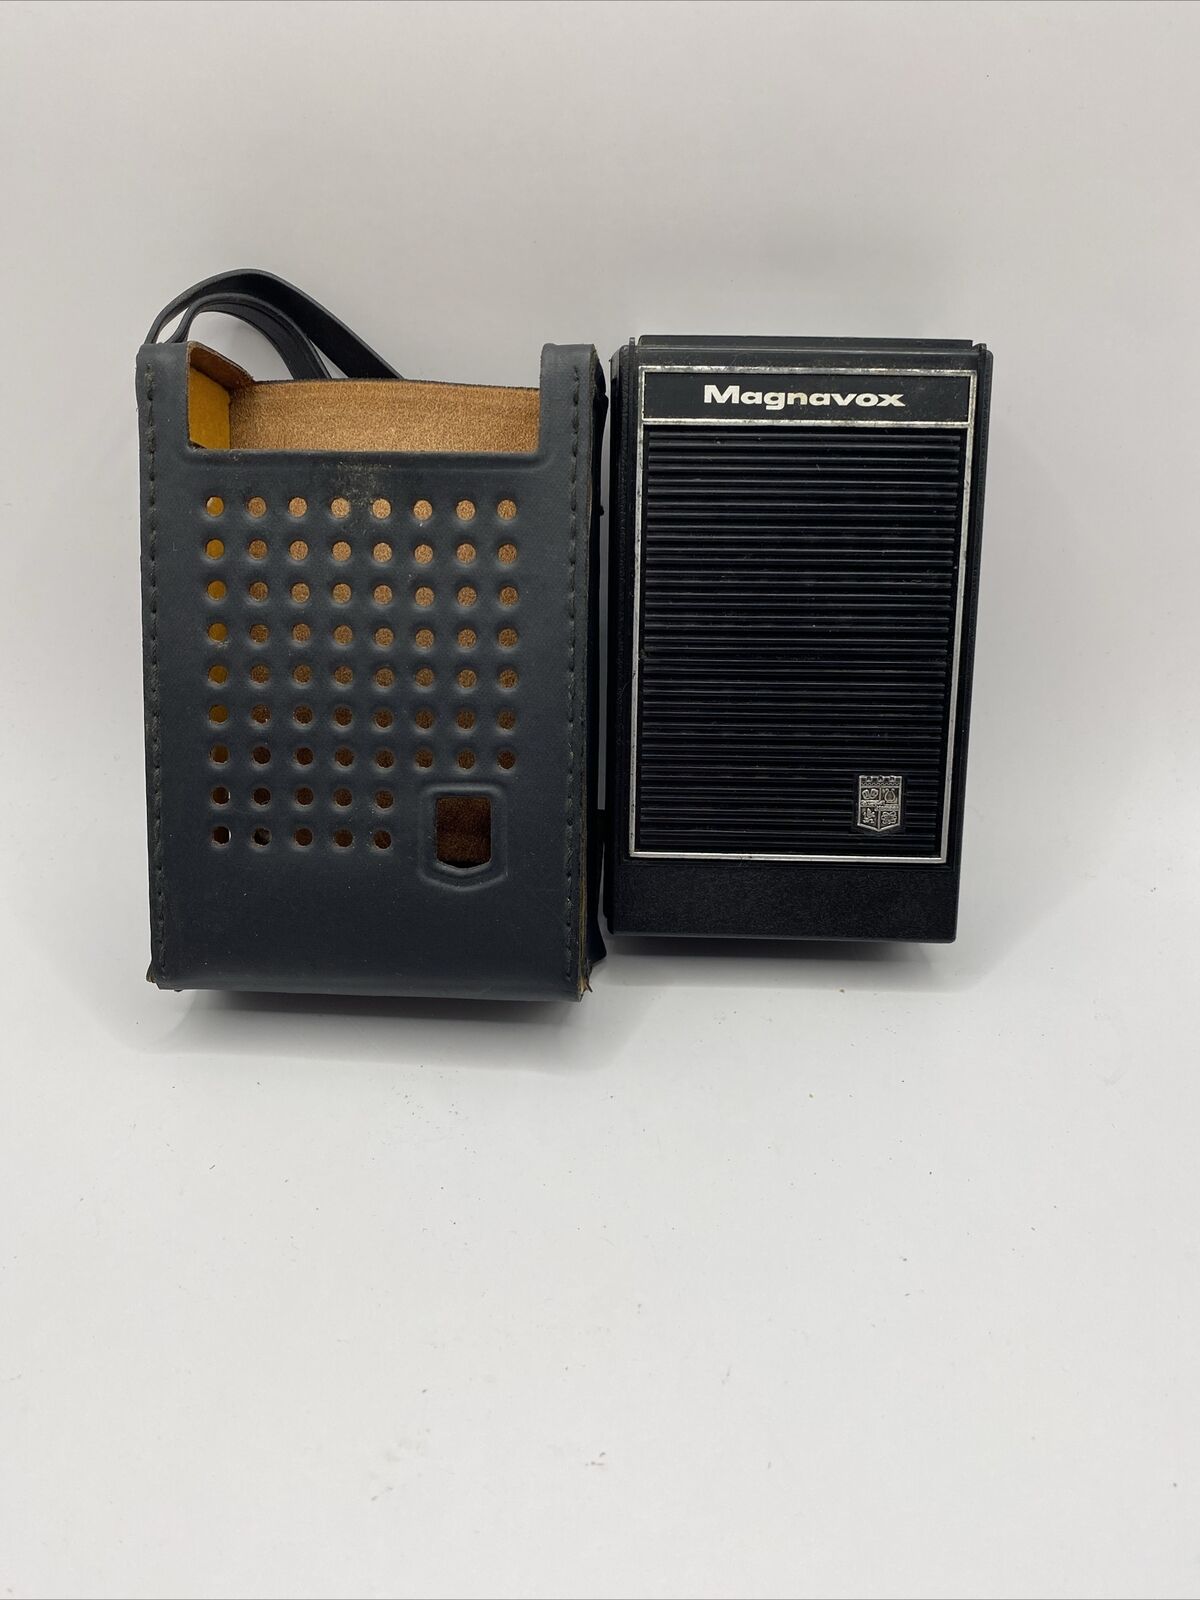 Vintage Magnavox Solid State AM Transistor Radio & Case WORKS FAST SHIPPING